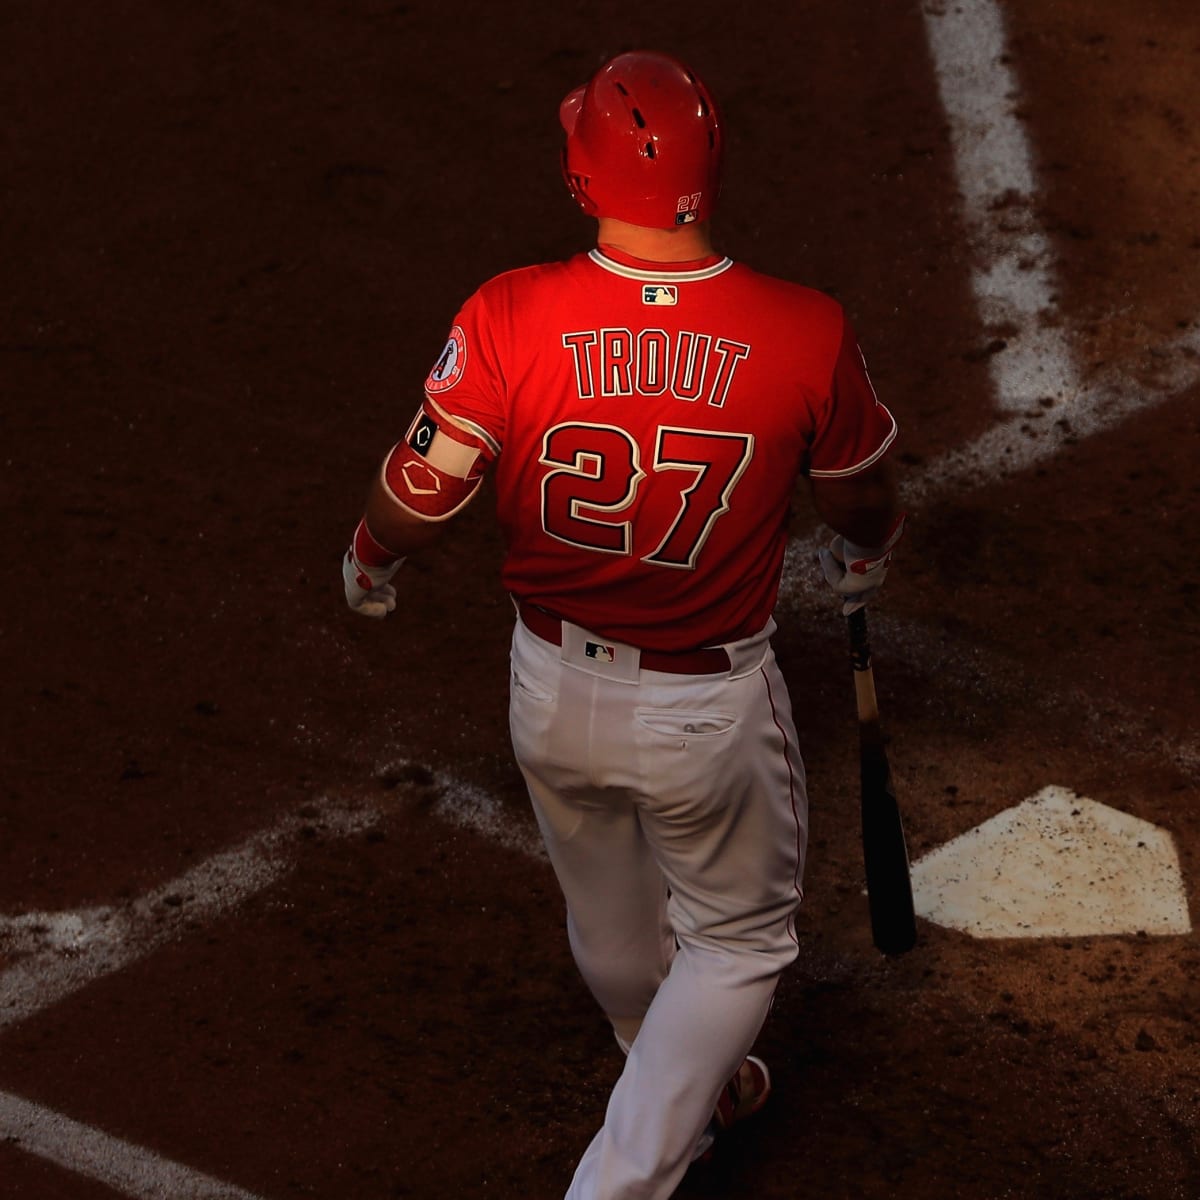 The unprecedented greatness of Mike Trout - Sports Illustrated